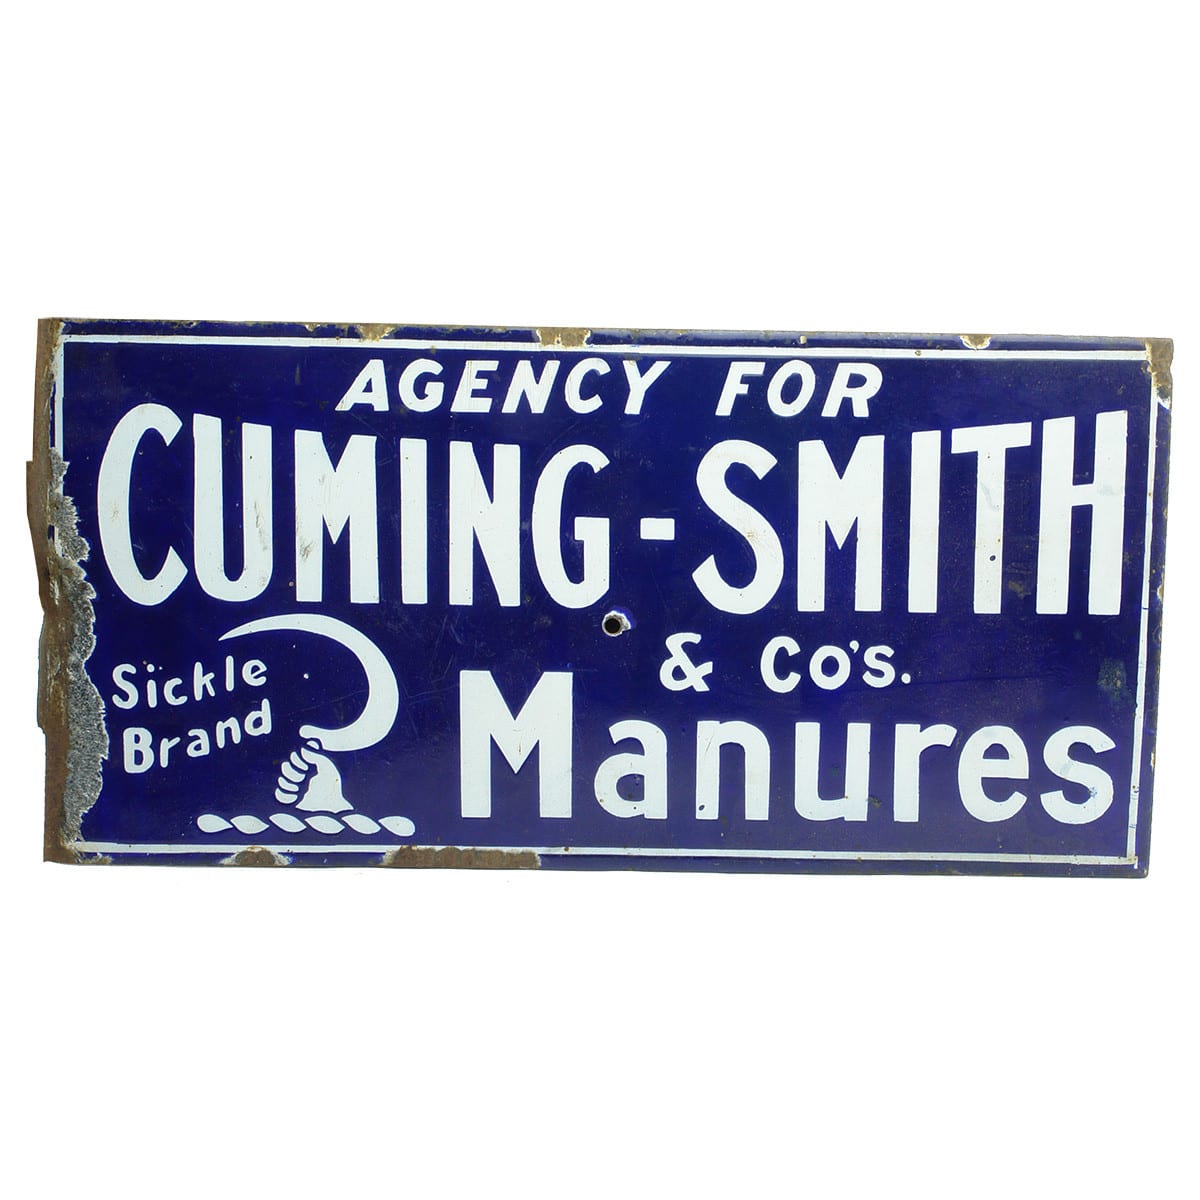 Sign. Cuming-Smith & Co's Sickle Brand Manures. White on Dark Blue. Double Sided. (Victoria)